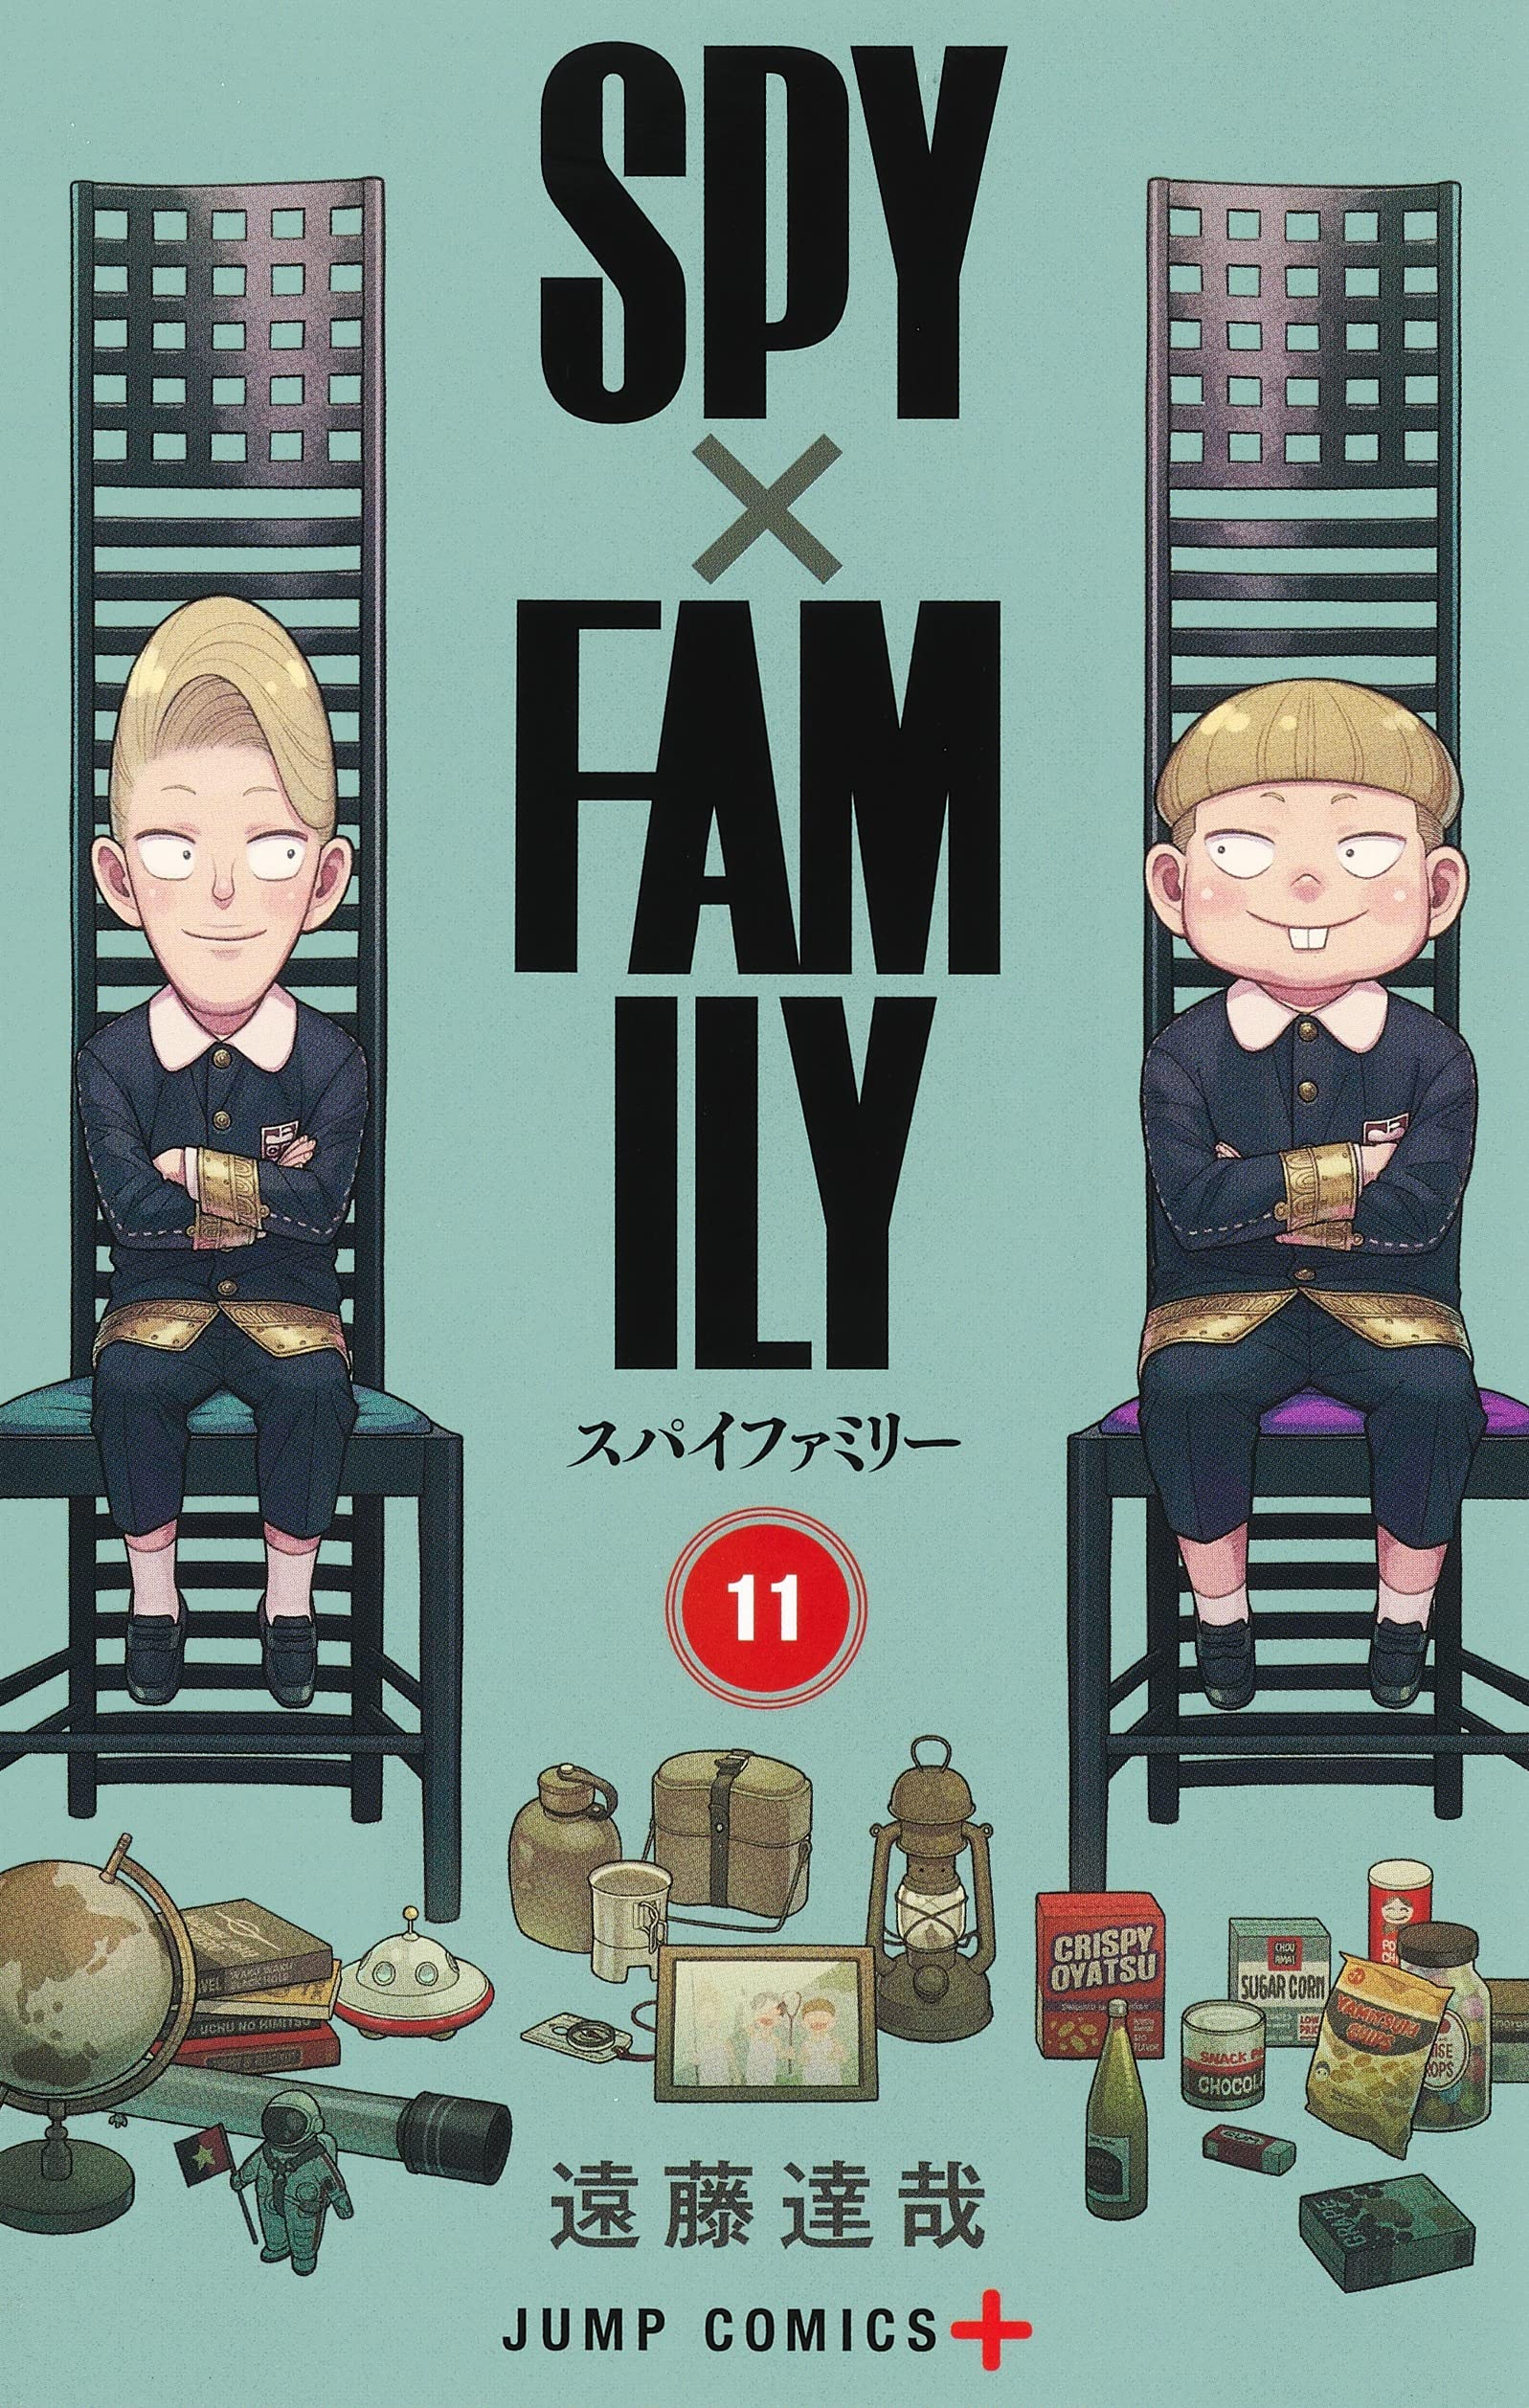 Spy x Family Releases Special Poster for Episode 6